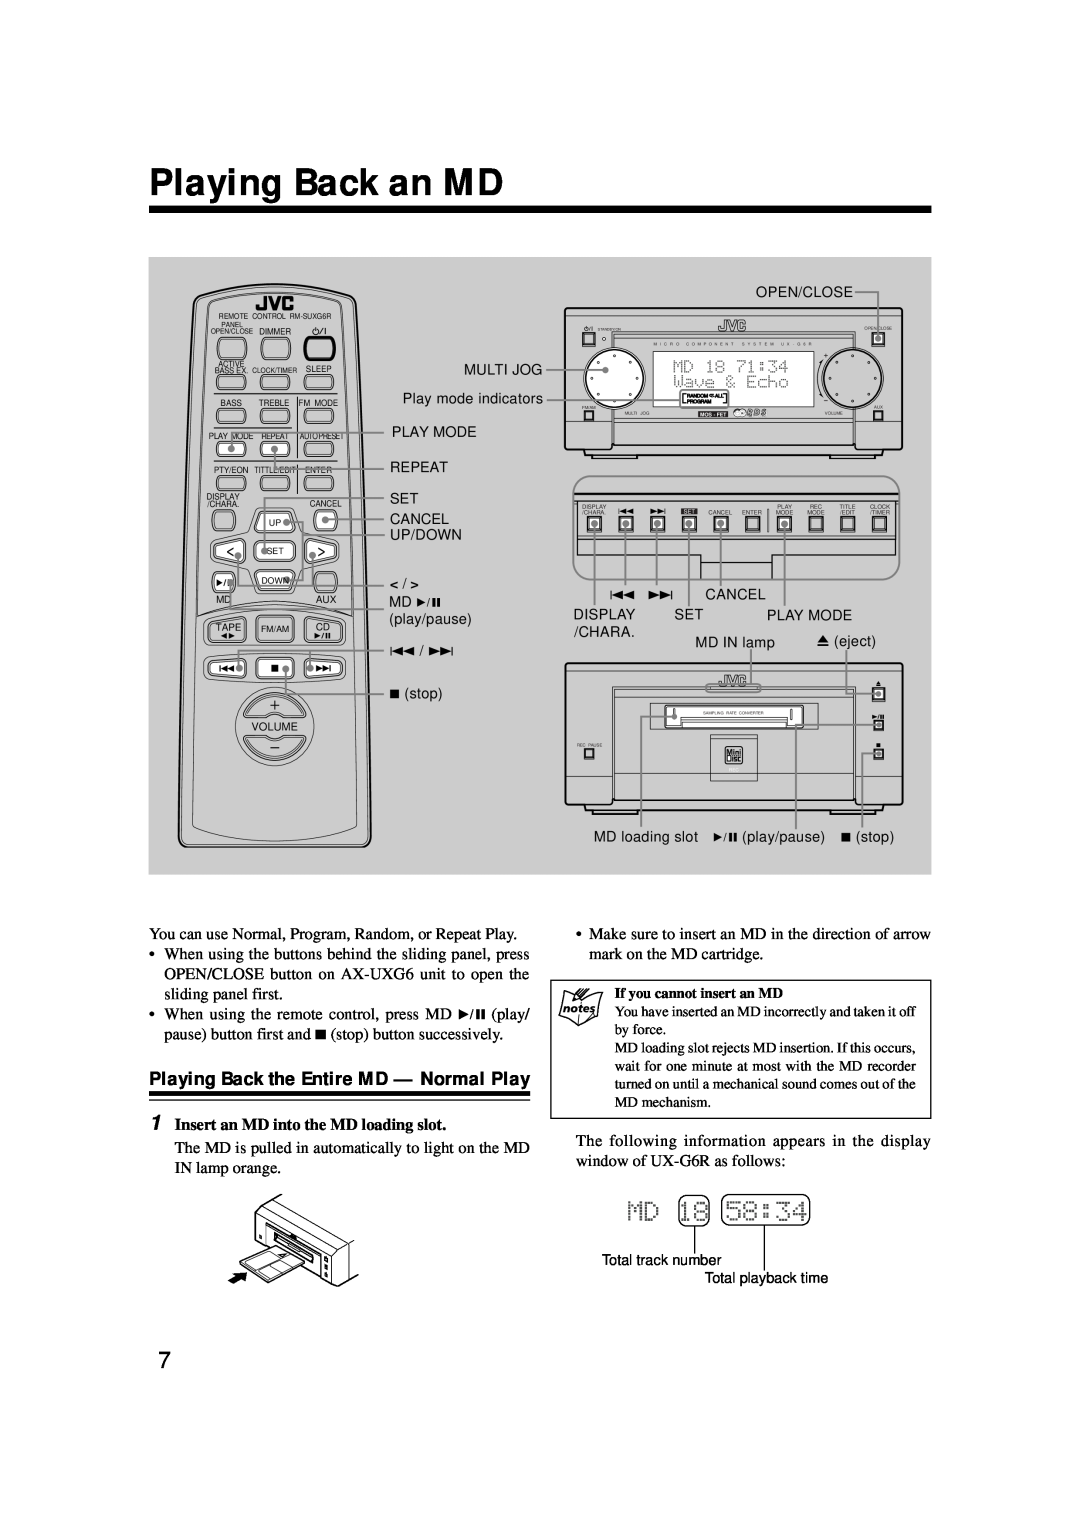 JVC XM-G6 manual Playing Back an MD, Playing Back the Entire MD - Normal Play 